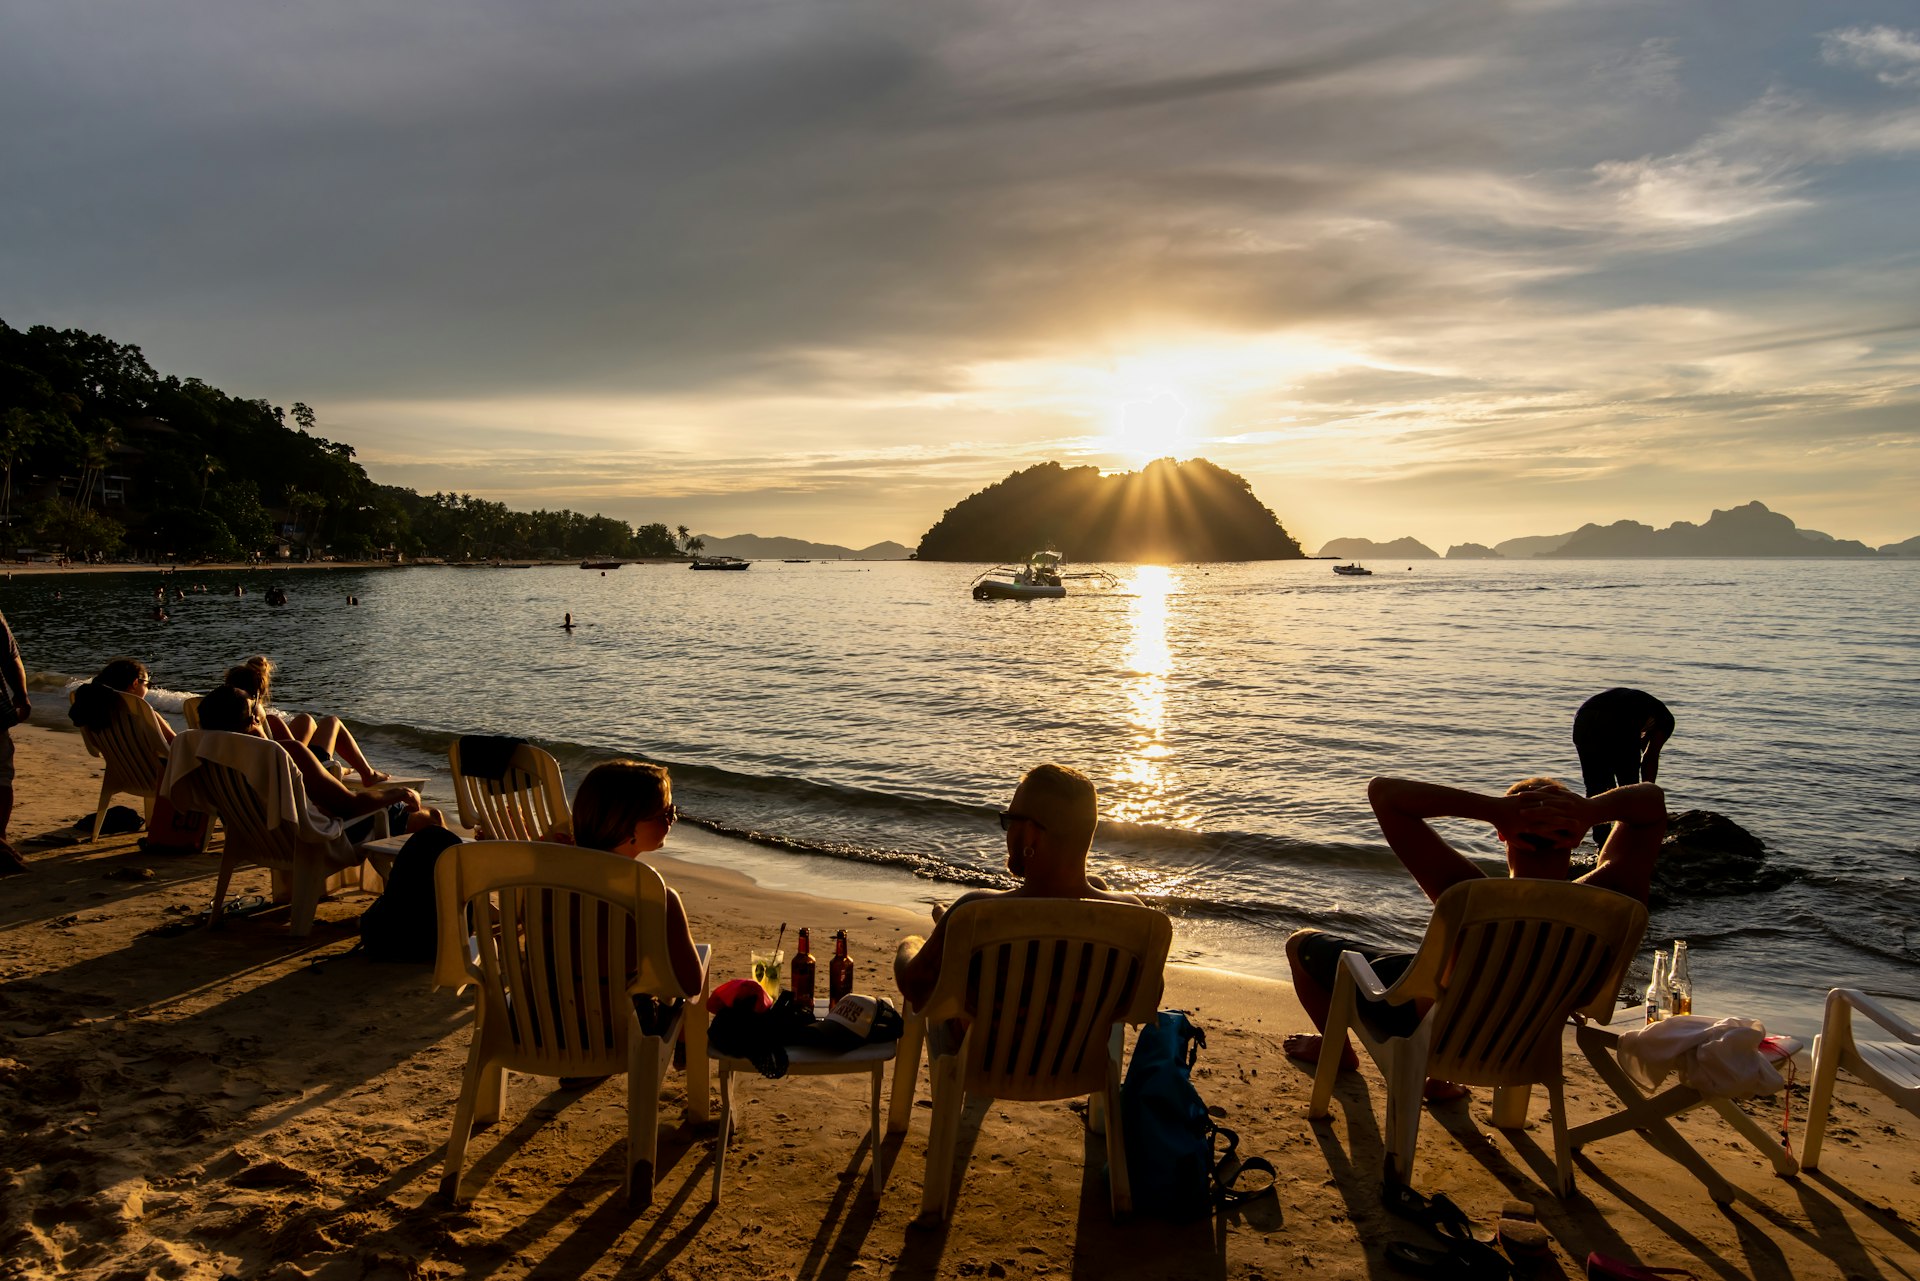 People watching the sunset on the Maremegmeg beach at El nido, Palawan, Philippines